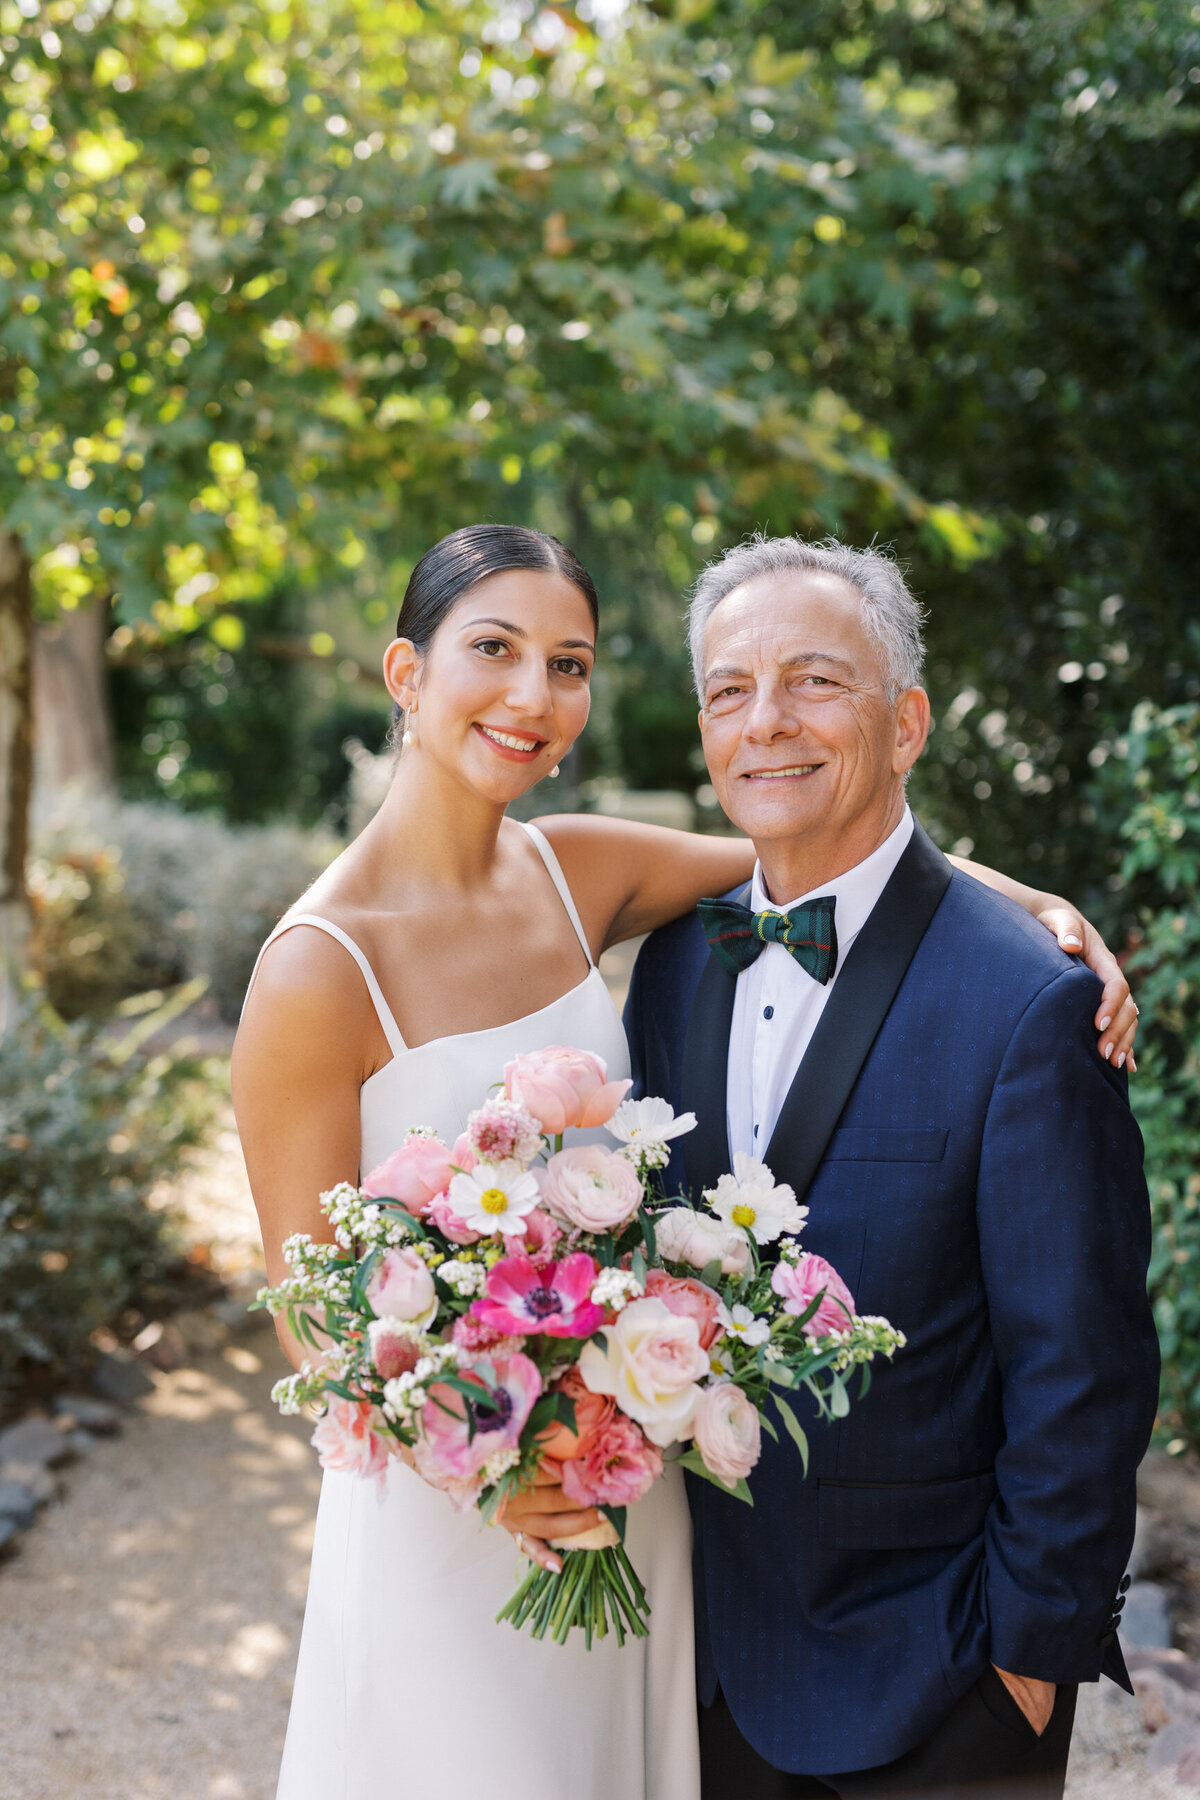 Angelica Marie Photography_Natalie Pirzad and Gordon Stewart Wedding_September 2022_The Lodge at Malibou Lake Wedding_Malibu Wedding Photographer_635